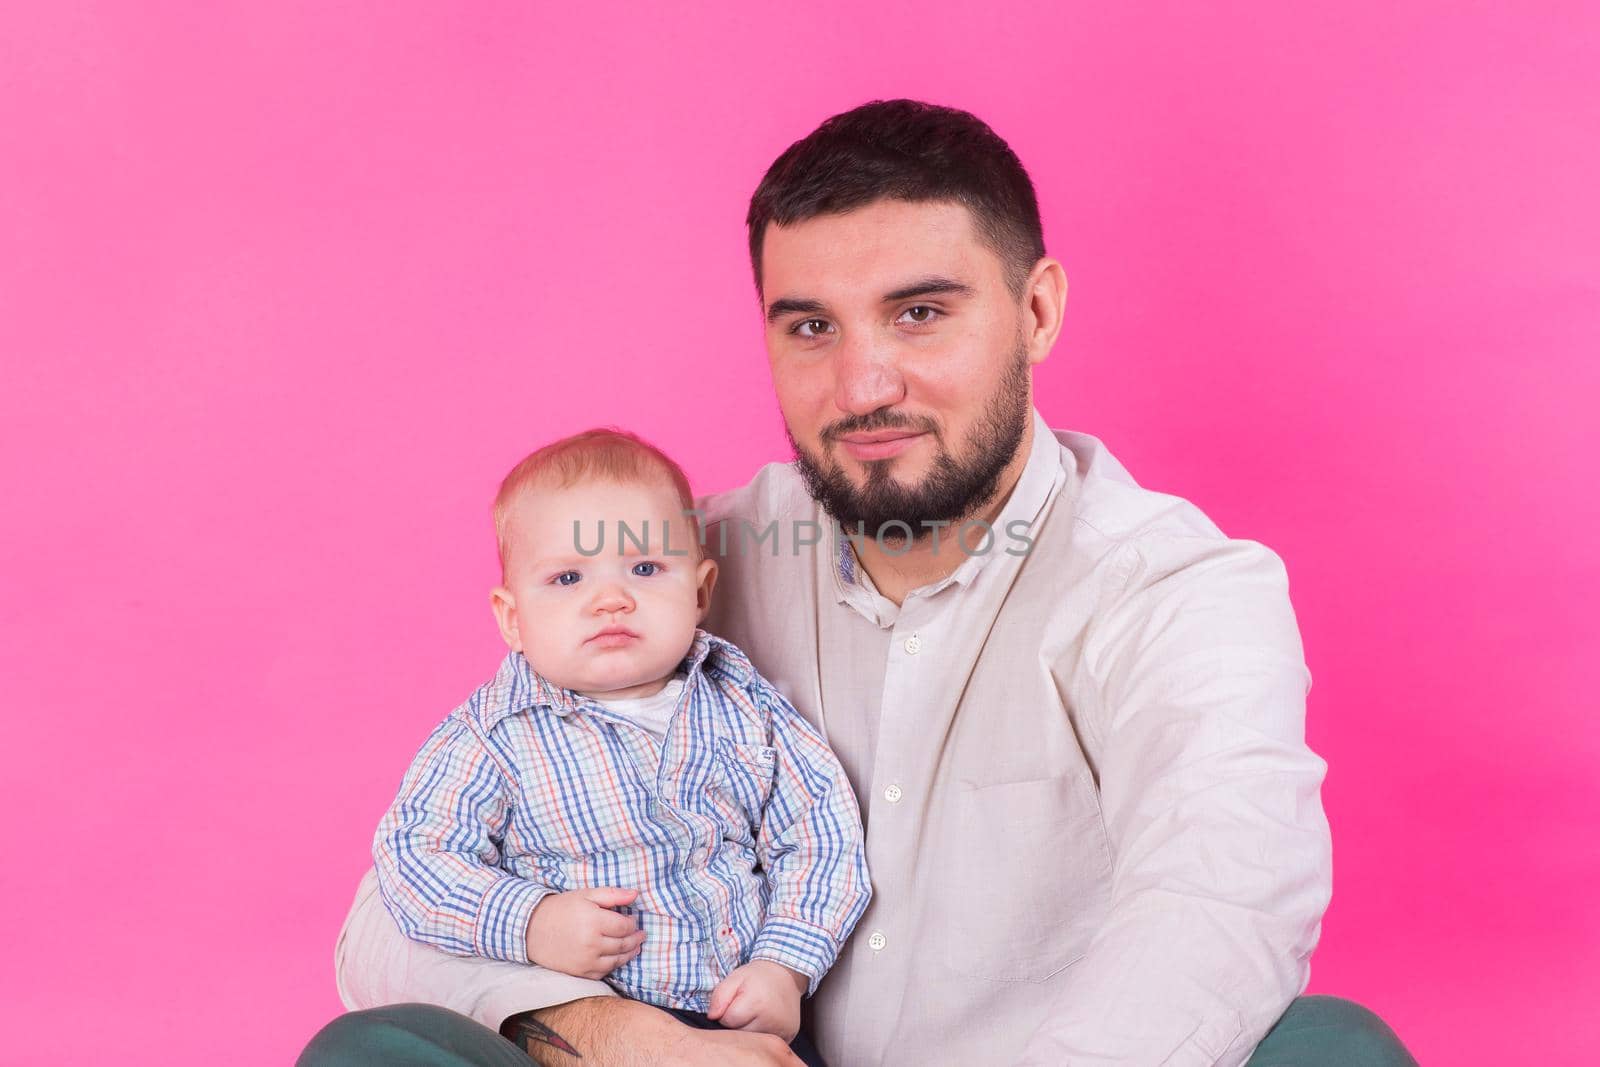 happy father with a baby son isolated on a pink background by Satura86